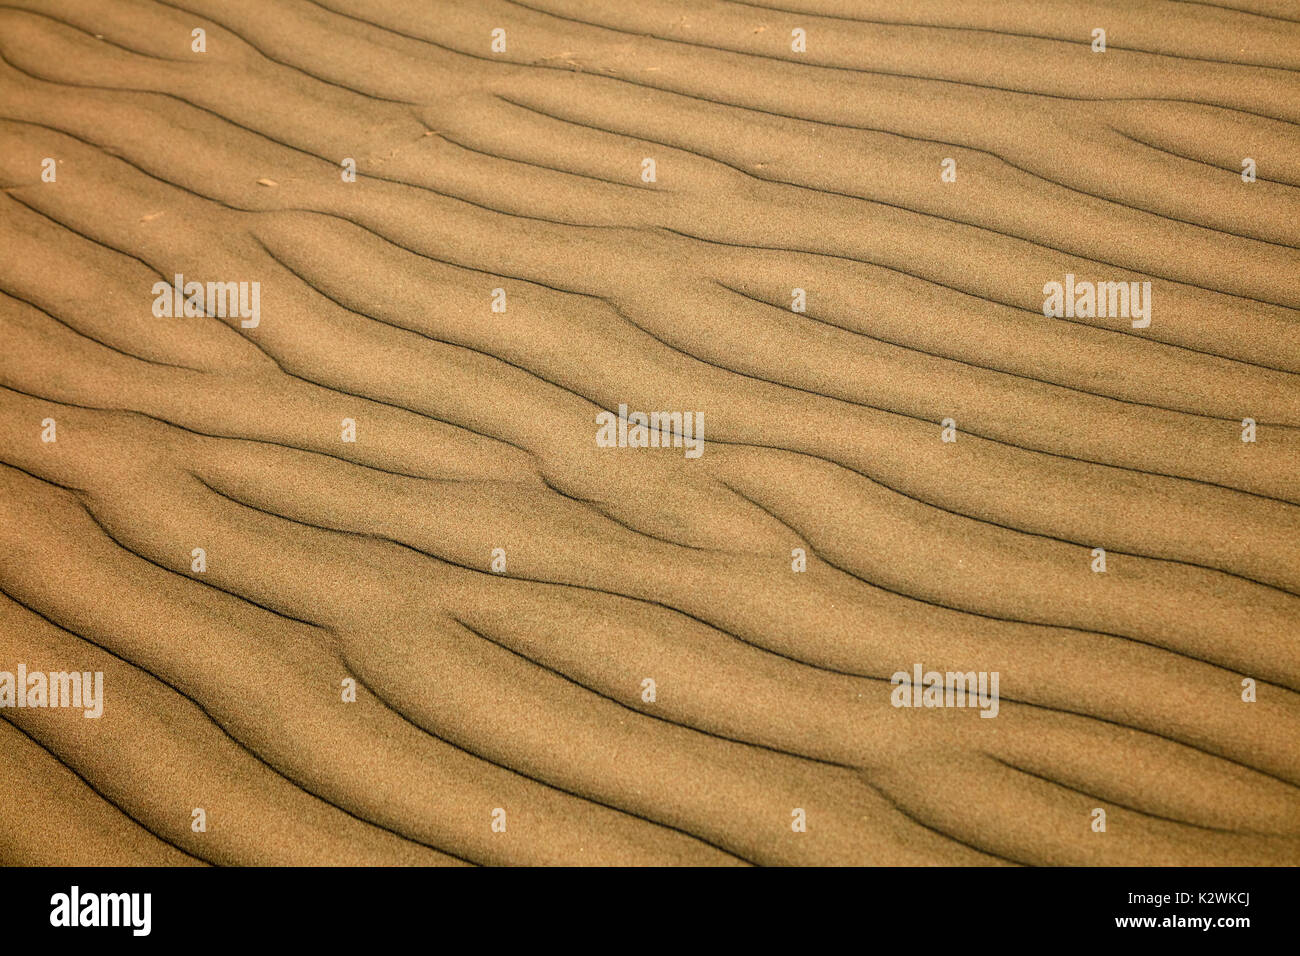 Ripples on sand dunes in desert near Huacachina Oasis, Ica, Peru, South America Stock Photo